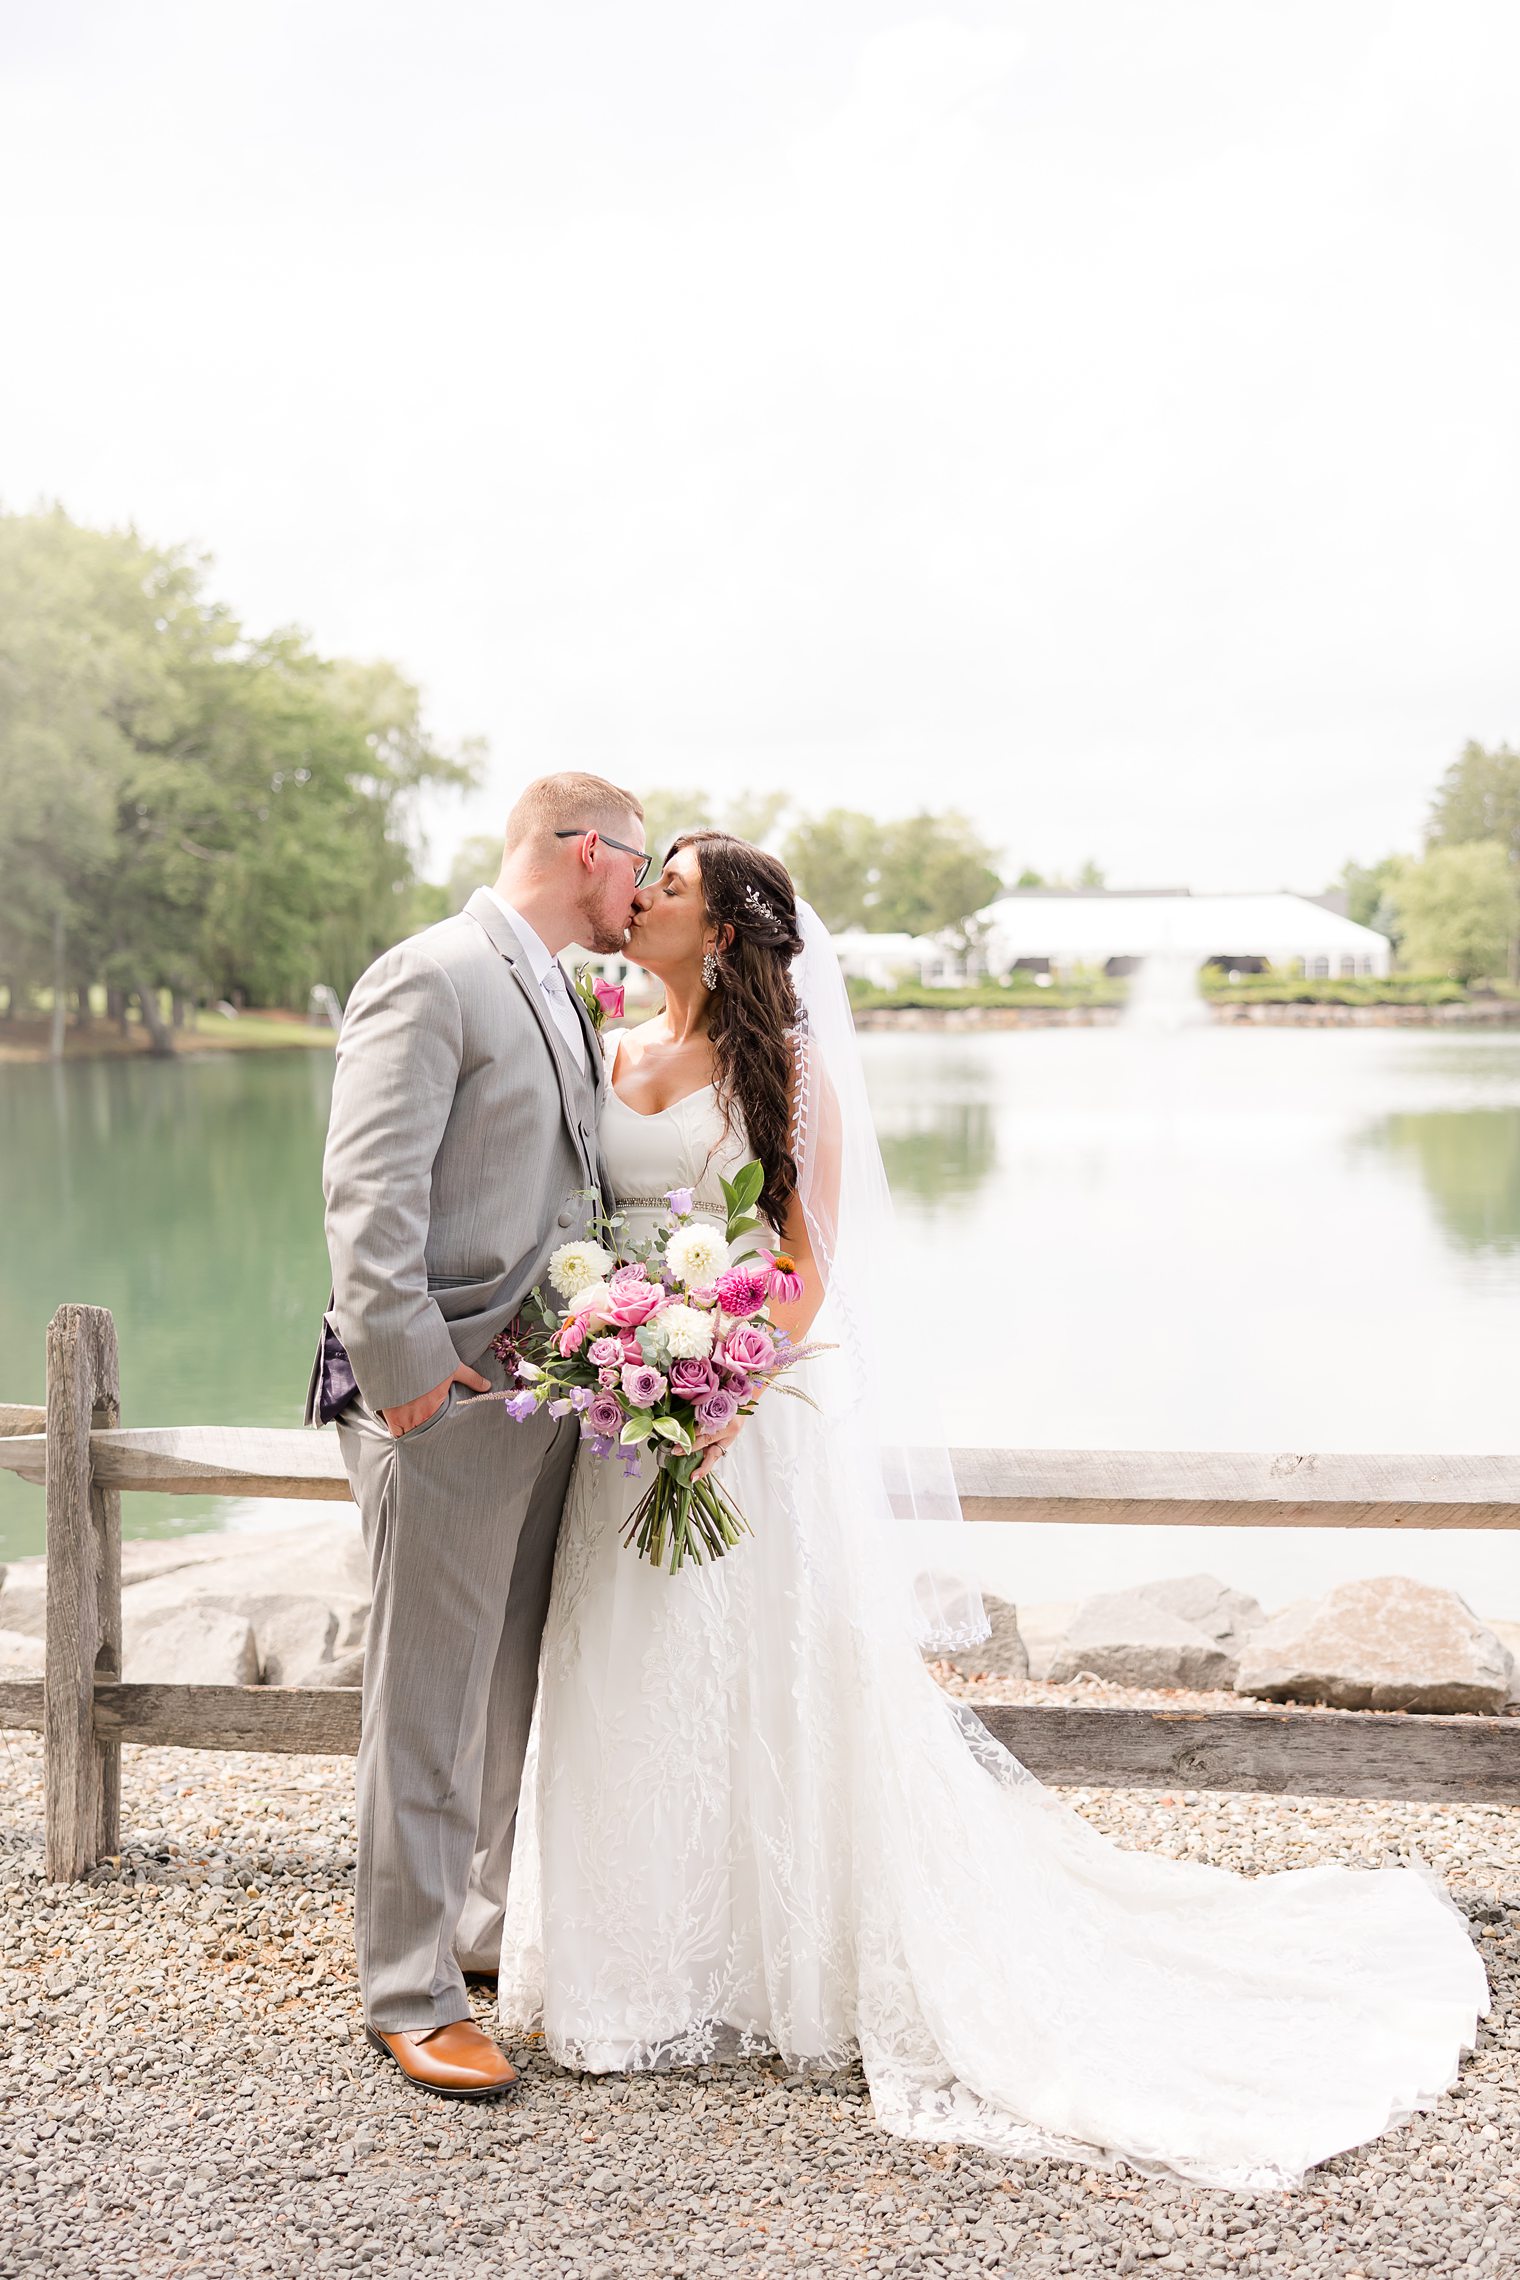 Couple kissing after their first look at the venue they choose to say I Do Windows on the Water at Frogbridge Wedding